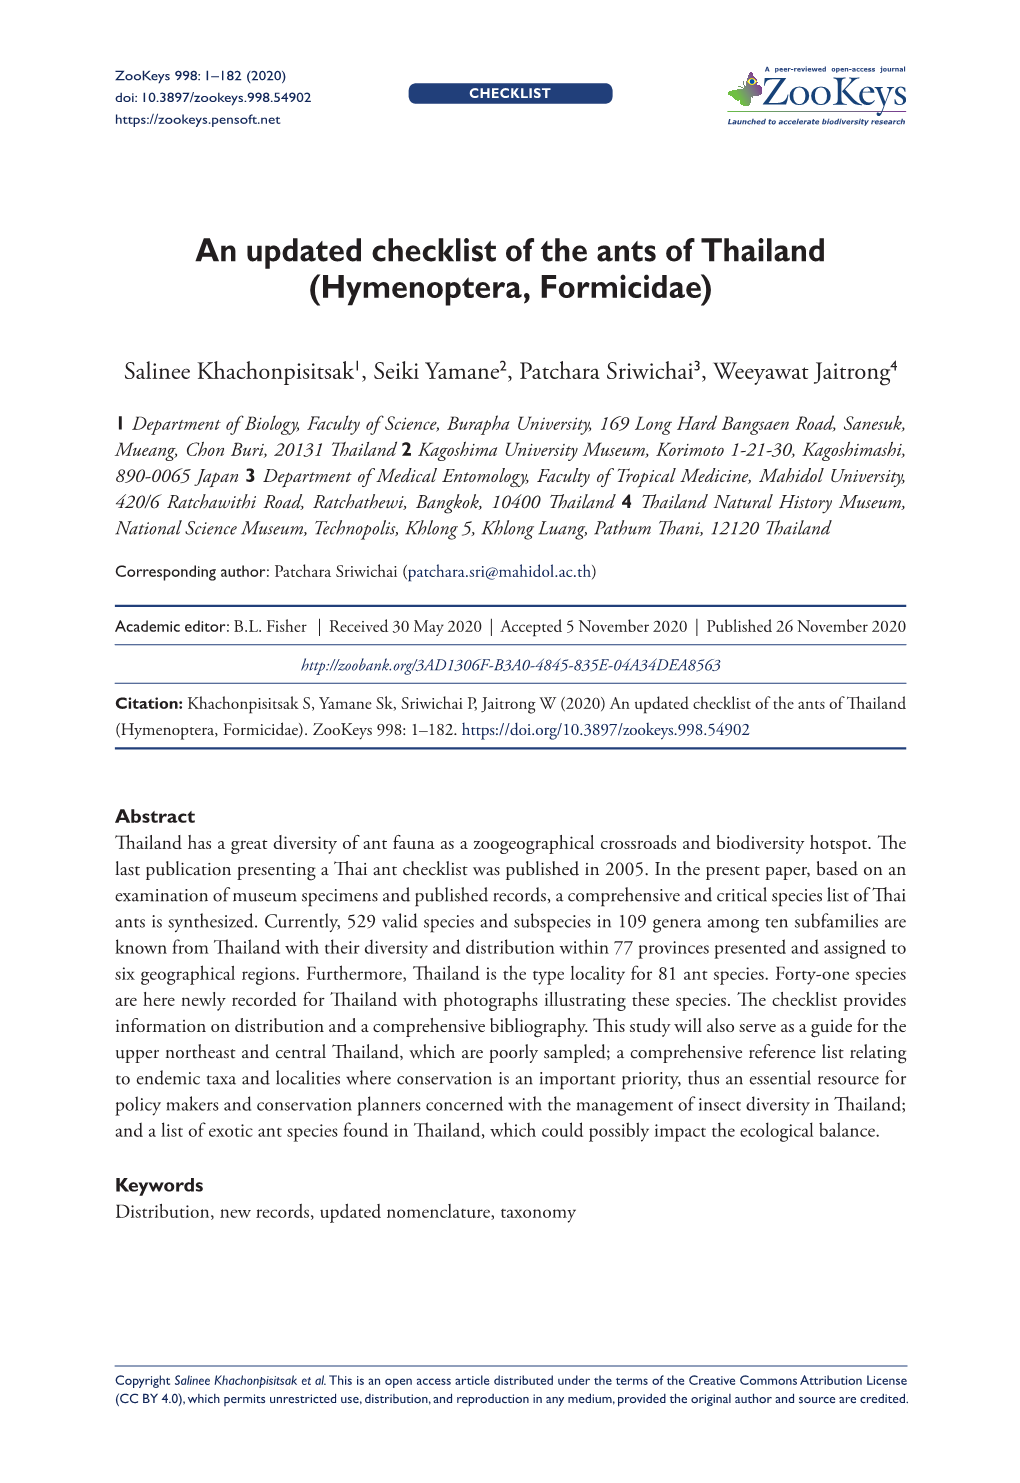 ﻿An Updated Checklist of the Ants of Thailand (Hymenoptera, Formicidae)